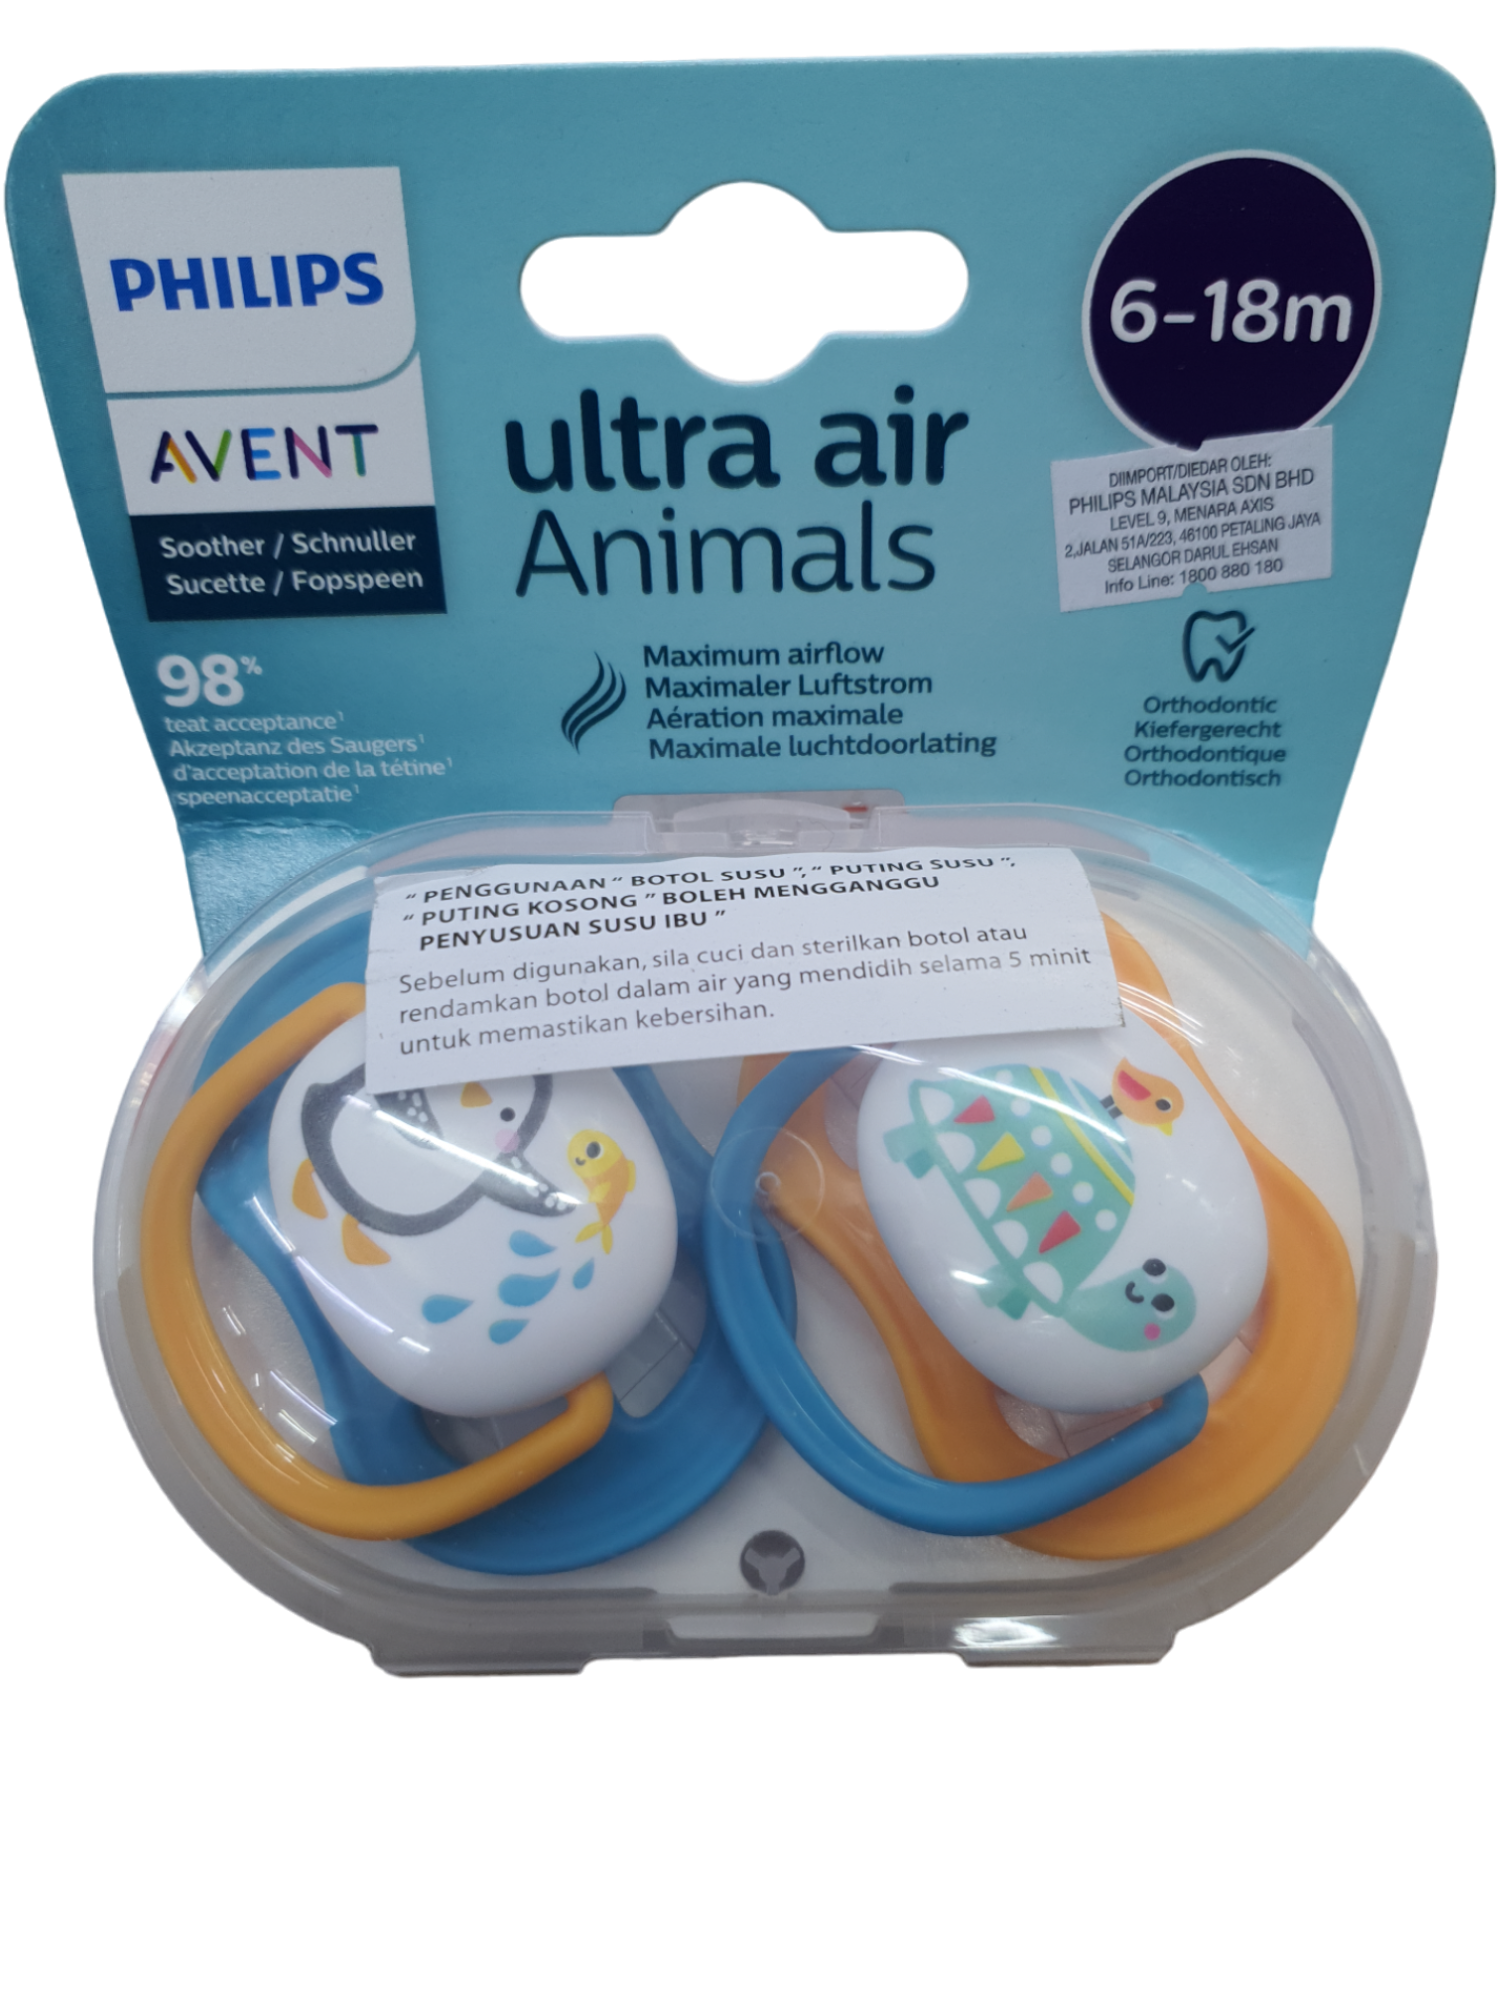 PHILIPS AVENT ULTRA AIR ANIMALS 6-18M+